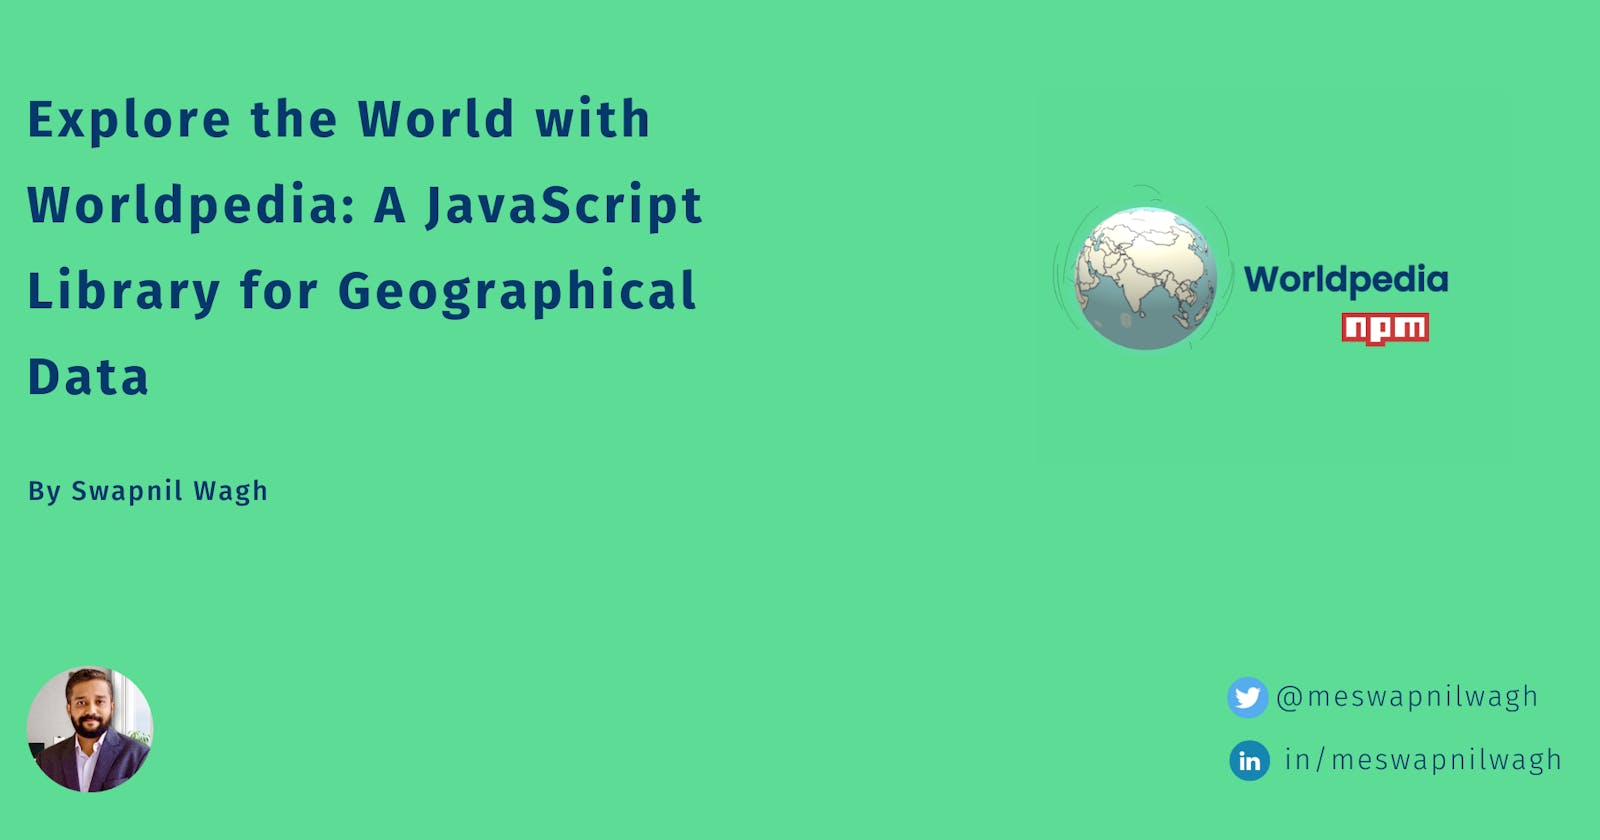 Explore the World with Worldpedia: A JavaScript Library for Geographical Data